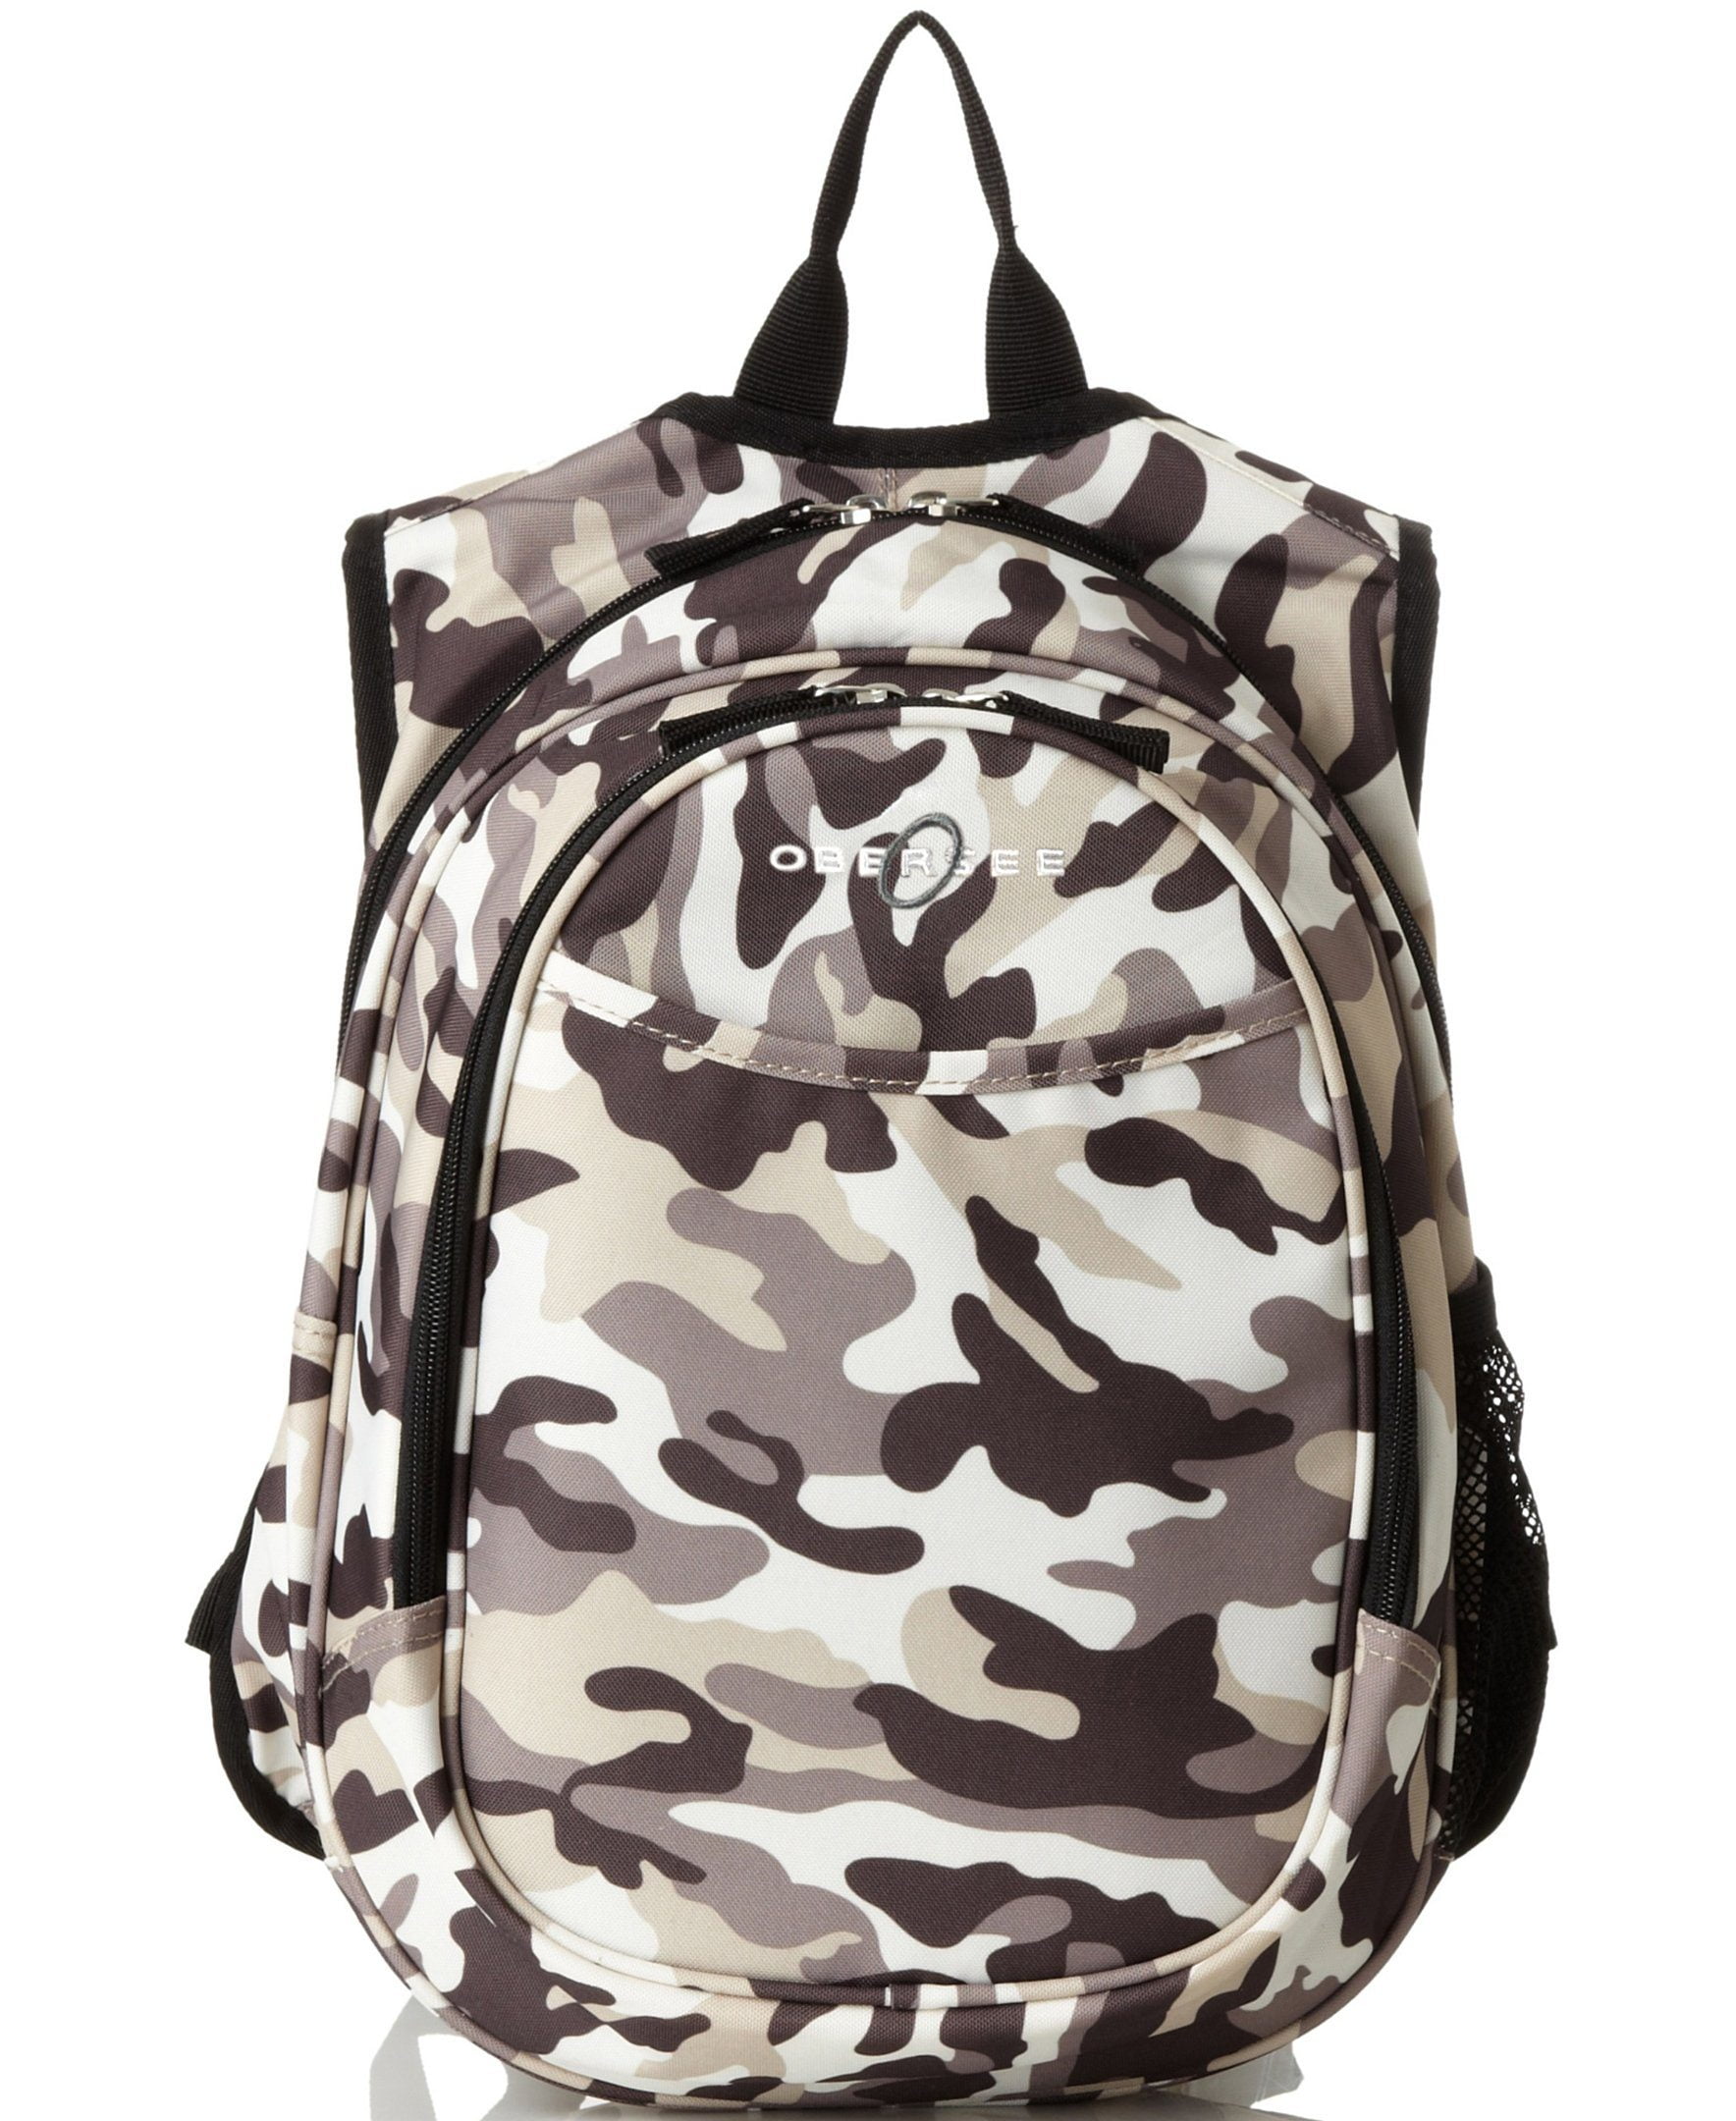 Camo 1 Pack Obersee Kids All-in-One Pre-School Backpacks with Integrated Cooler